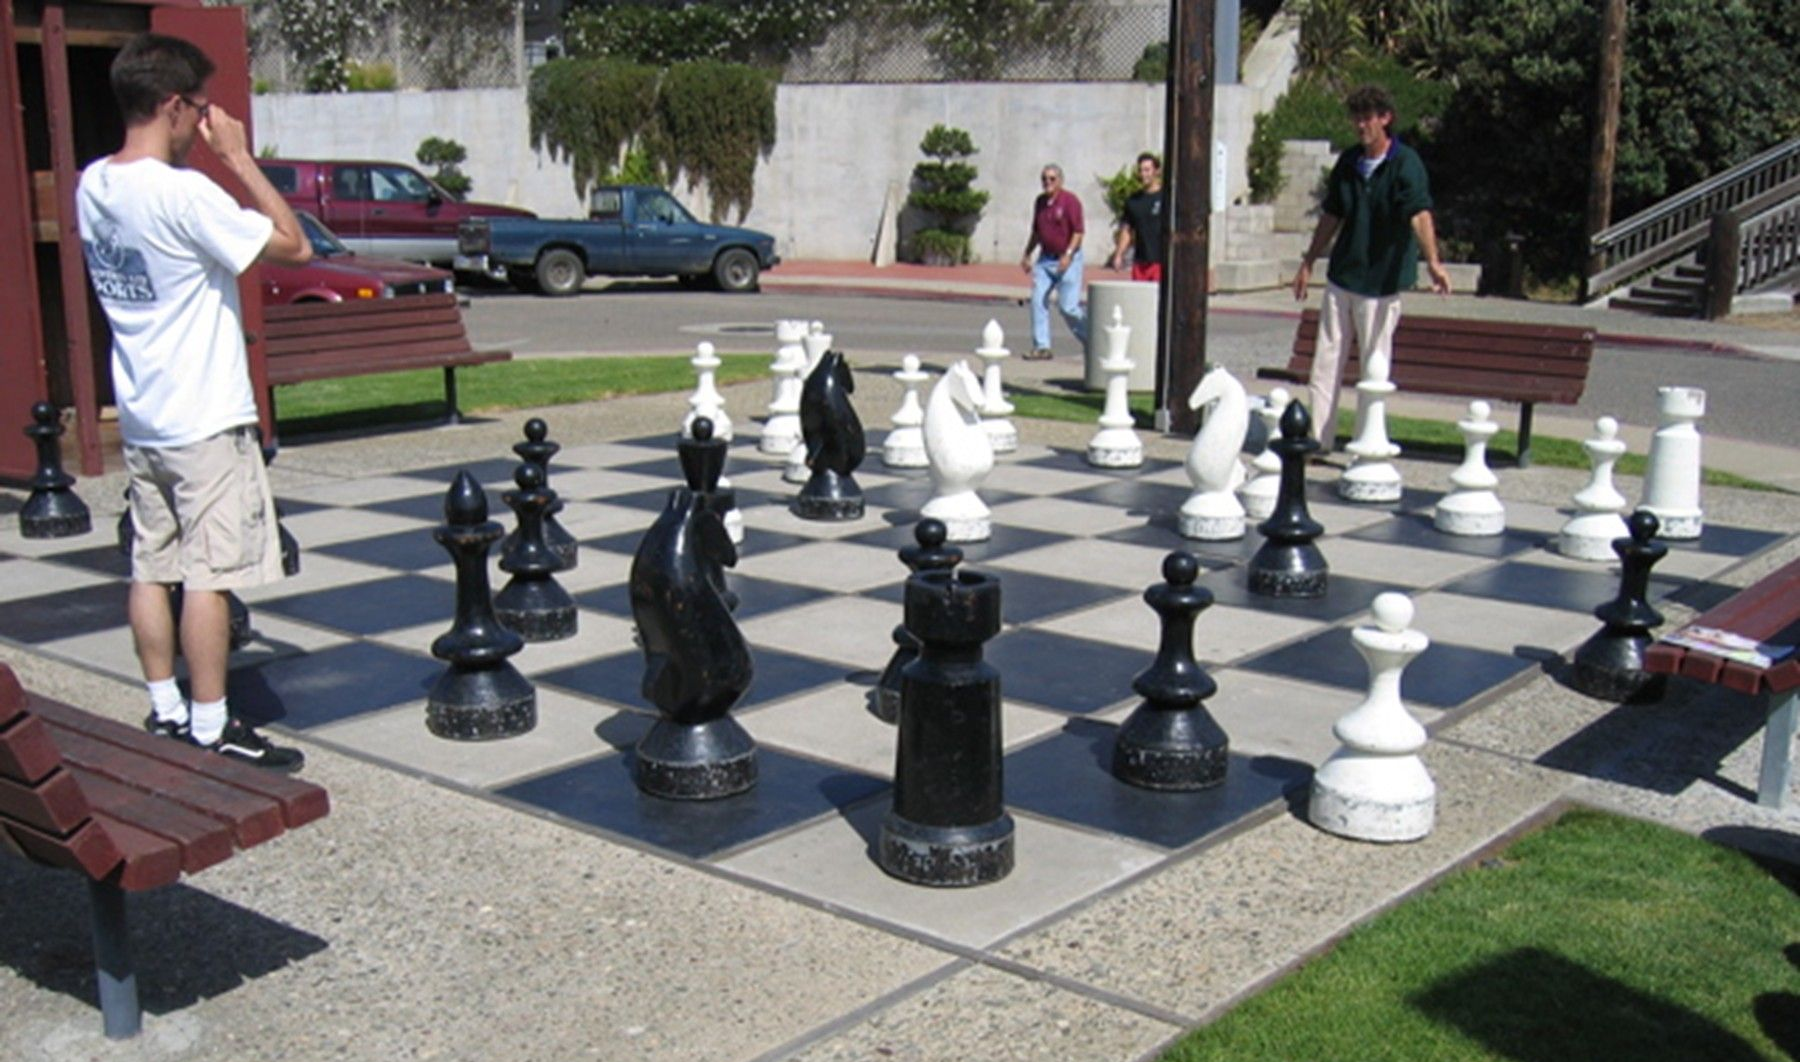 World's Largest Chess Set: world record set in Morro Bay, California